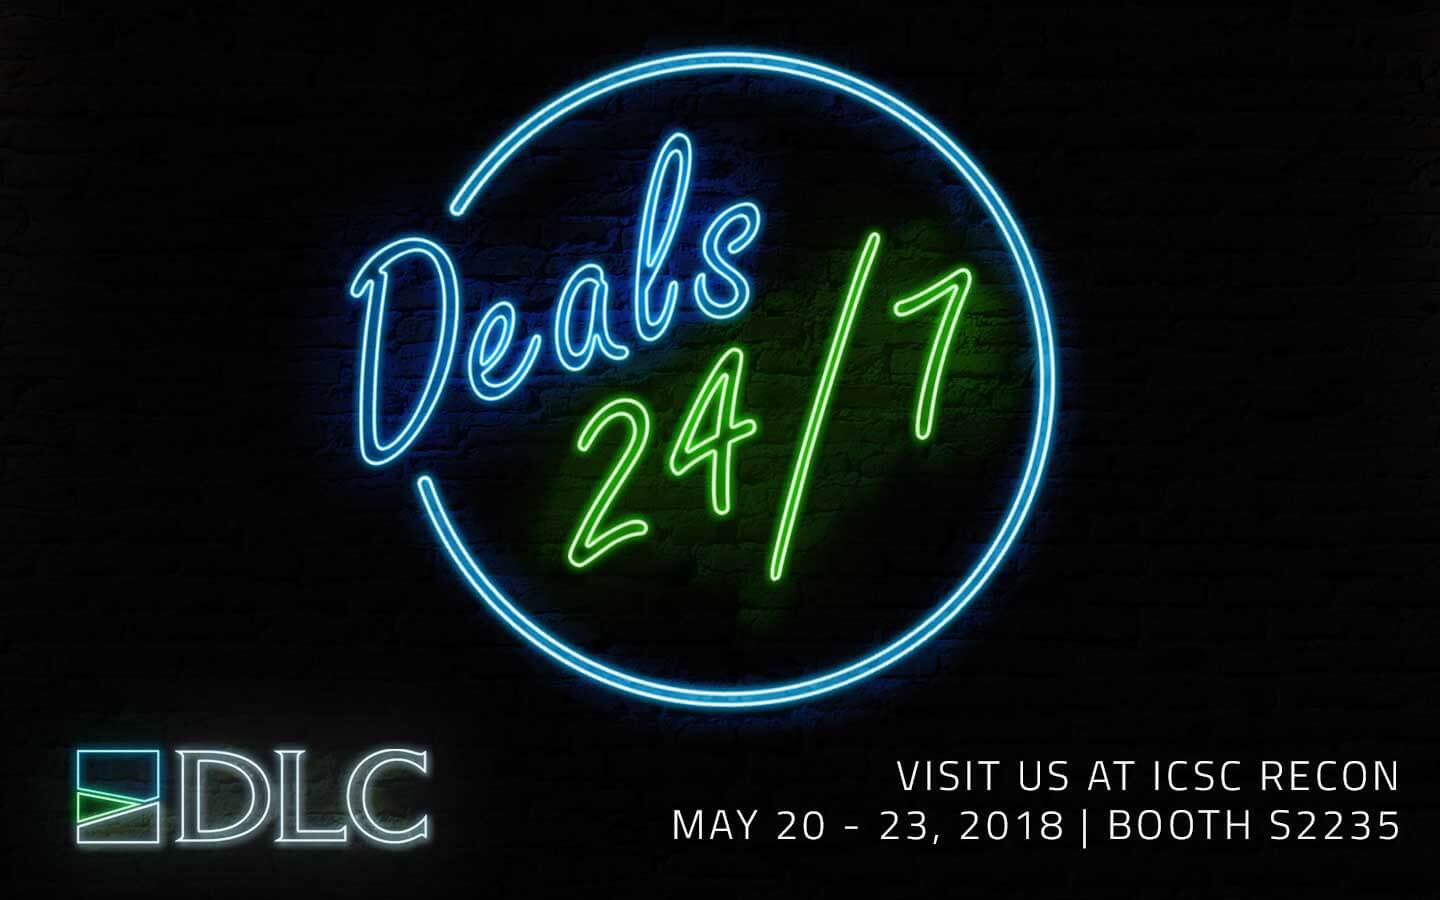 Neon Sign that says "Deals 24/7"